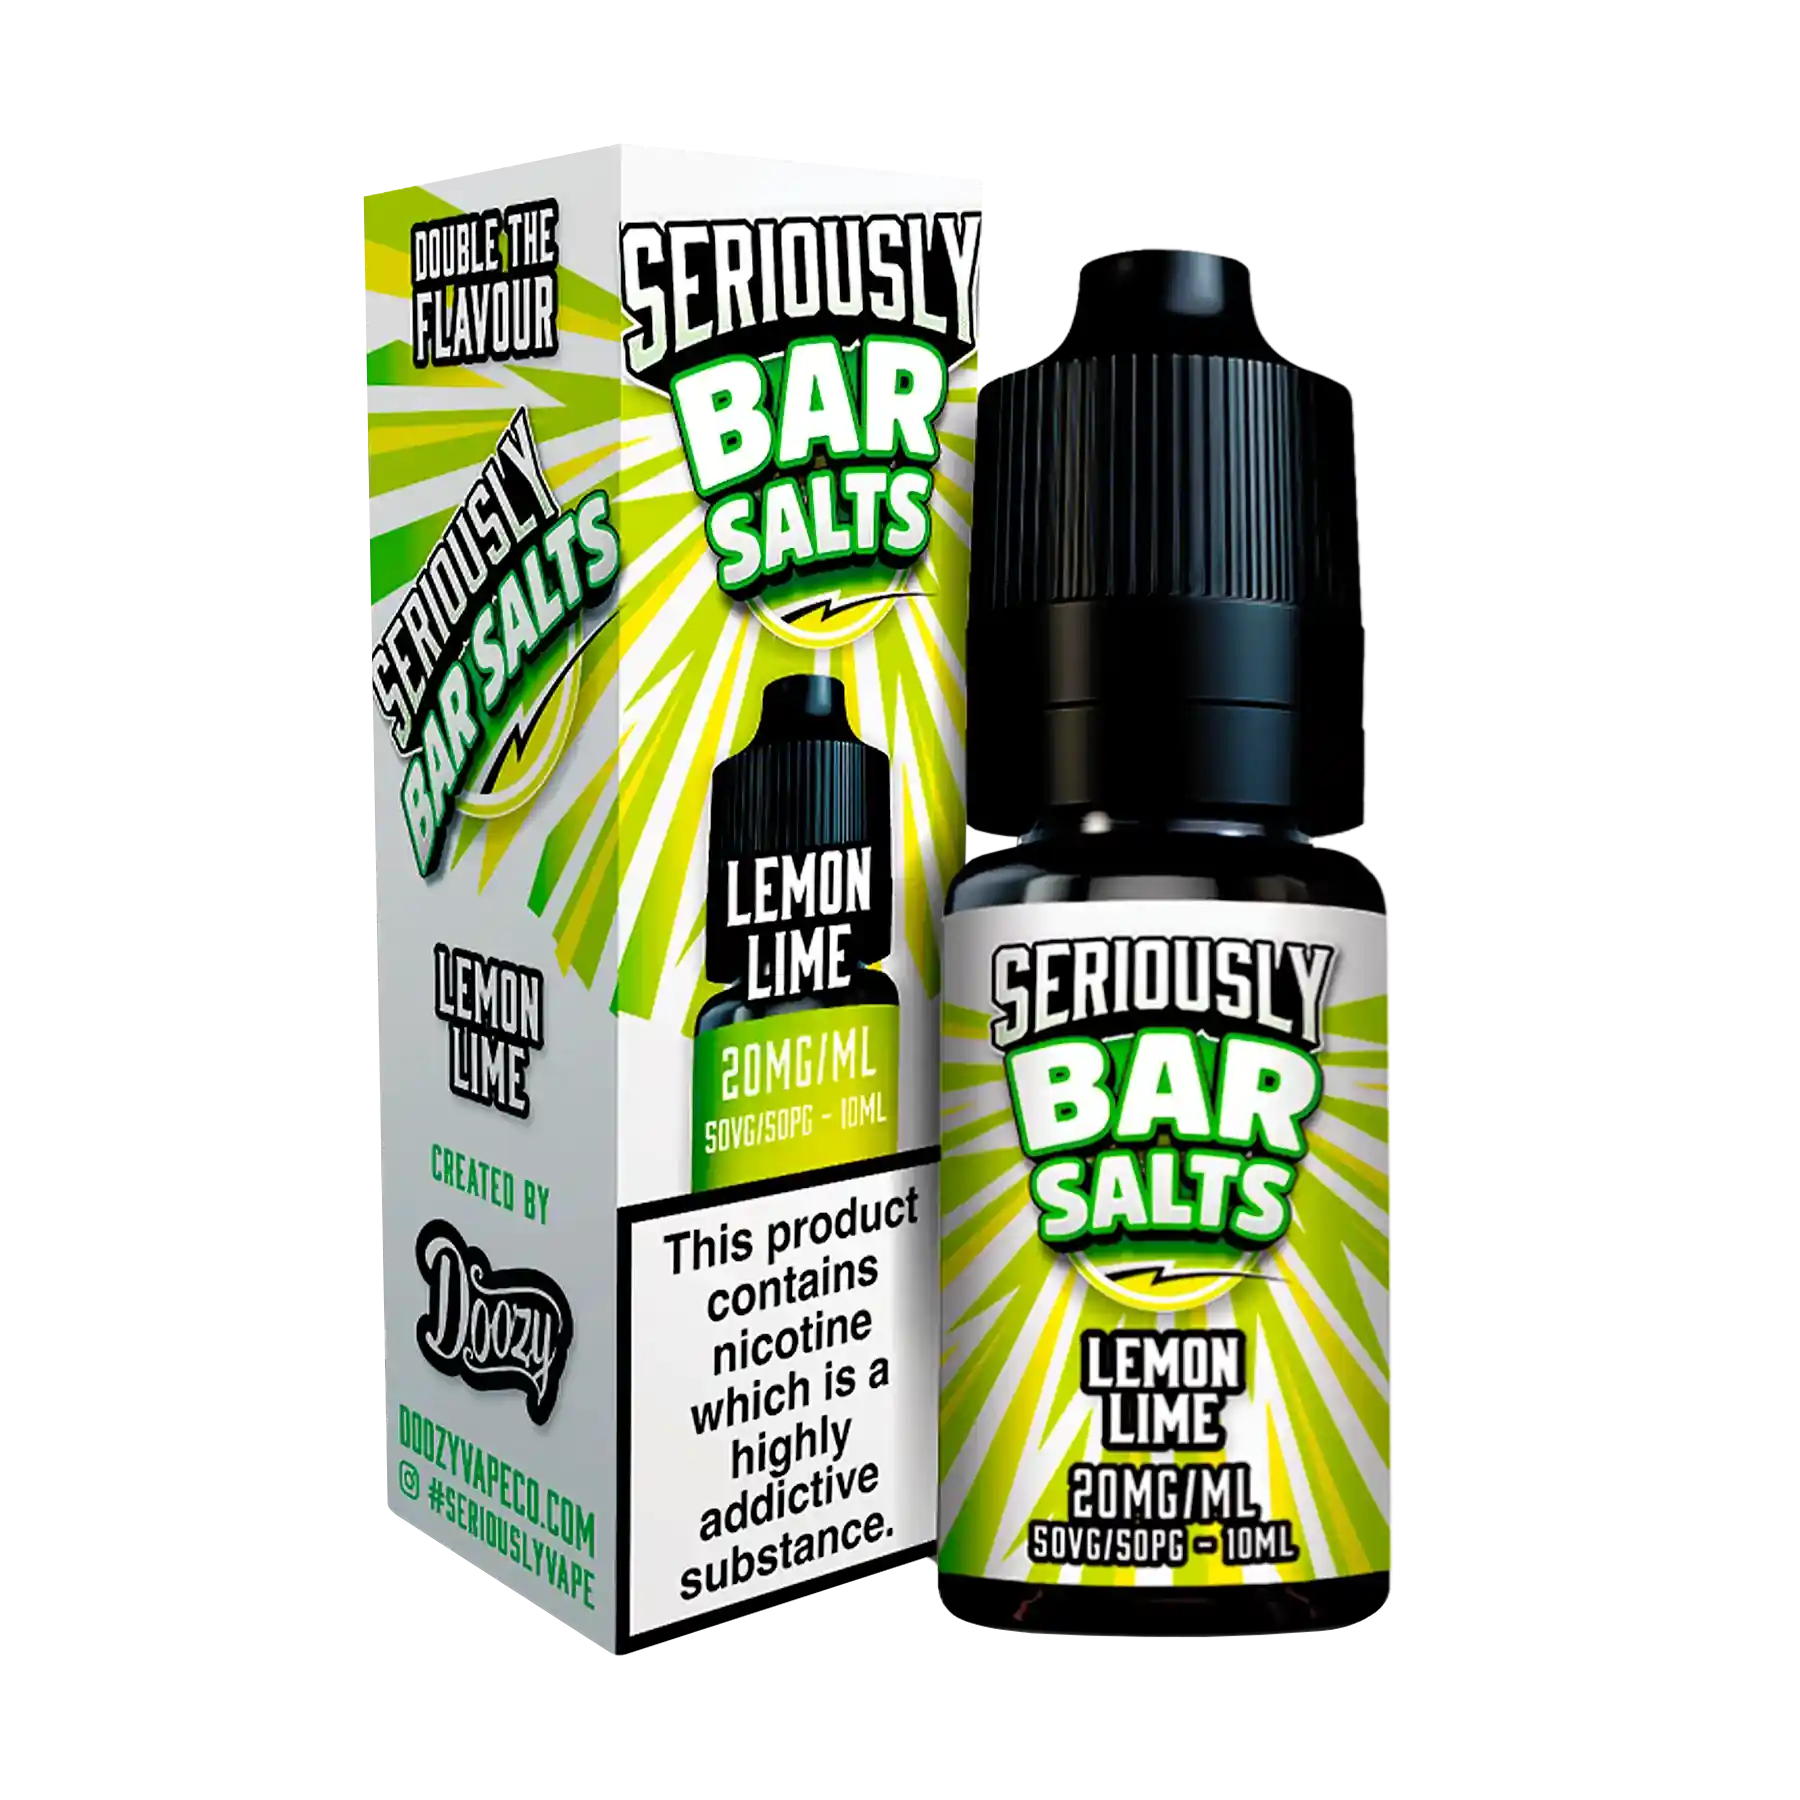 Seriously Bar Salts brings you Lemon Lime: A Classic Sweet and Sour mix of Citrus Lemon with a hearty Splash of Lime! The perfect ADV for all disposable fans.